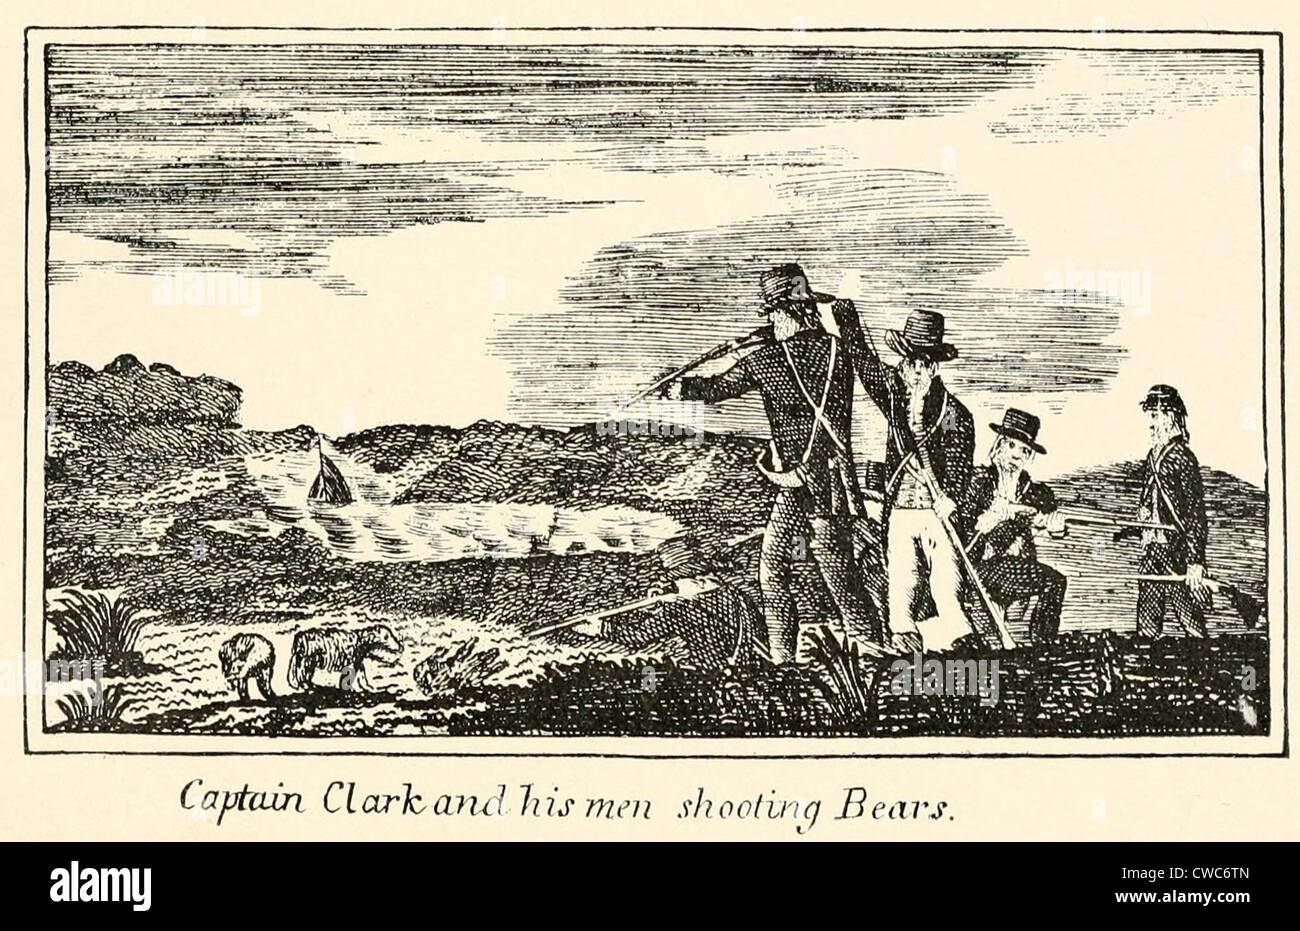 Illustration from Lewis and Clark's journal of the Corps of Discovery from 1803-6. 'Captain Clark and his men shooting bears.' Stock Photo